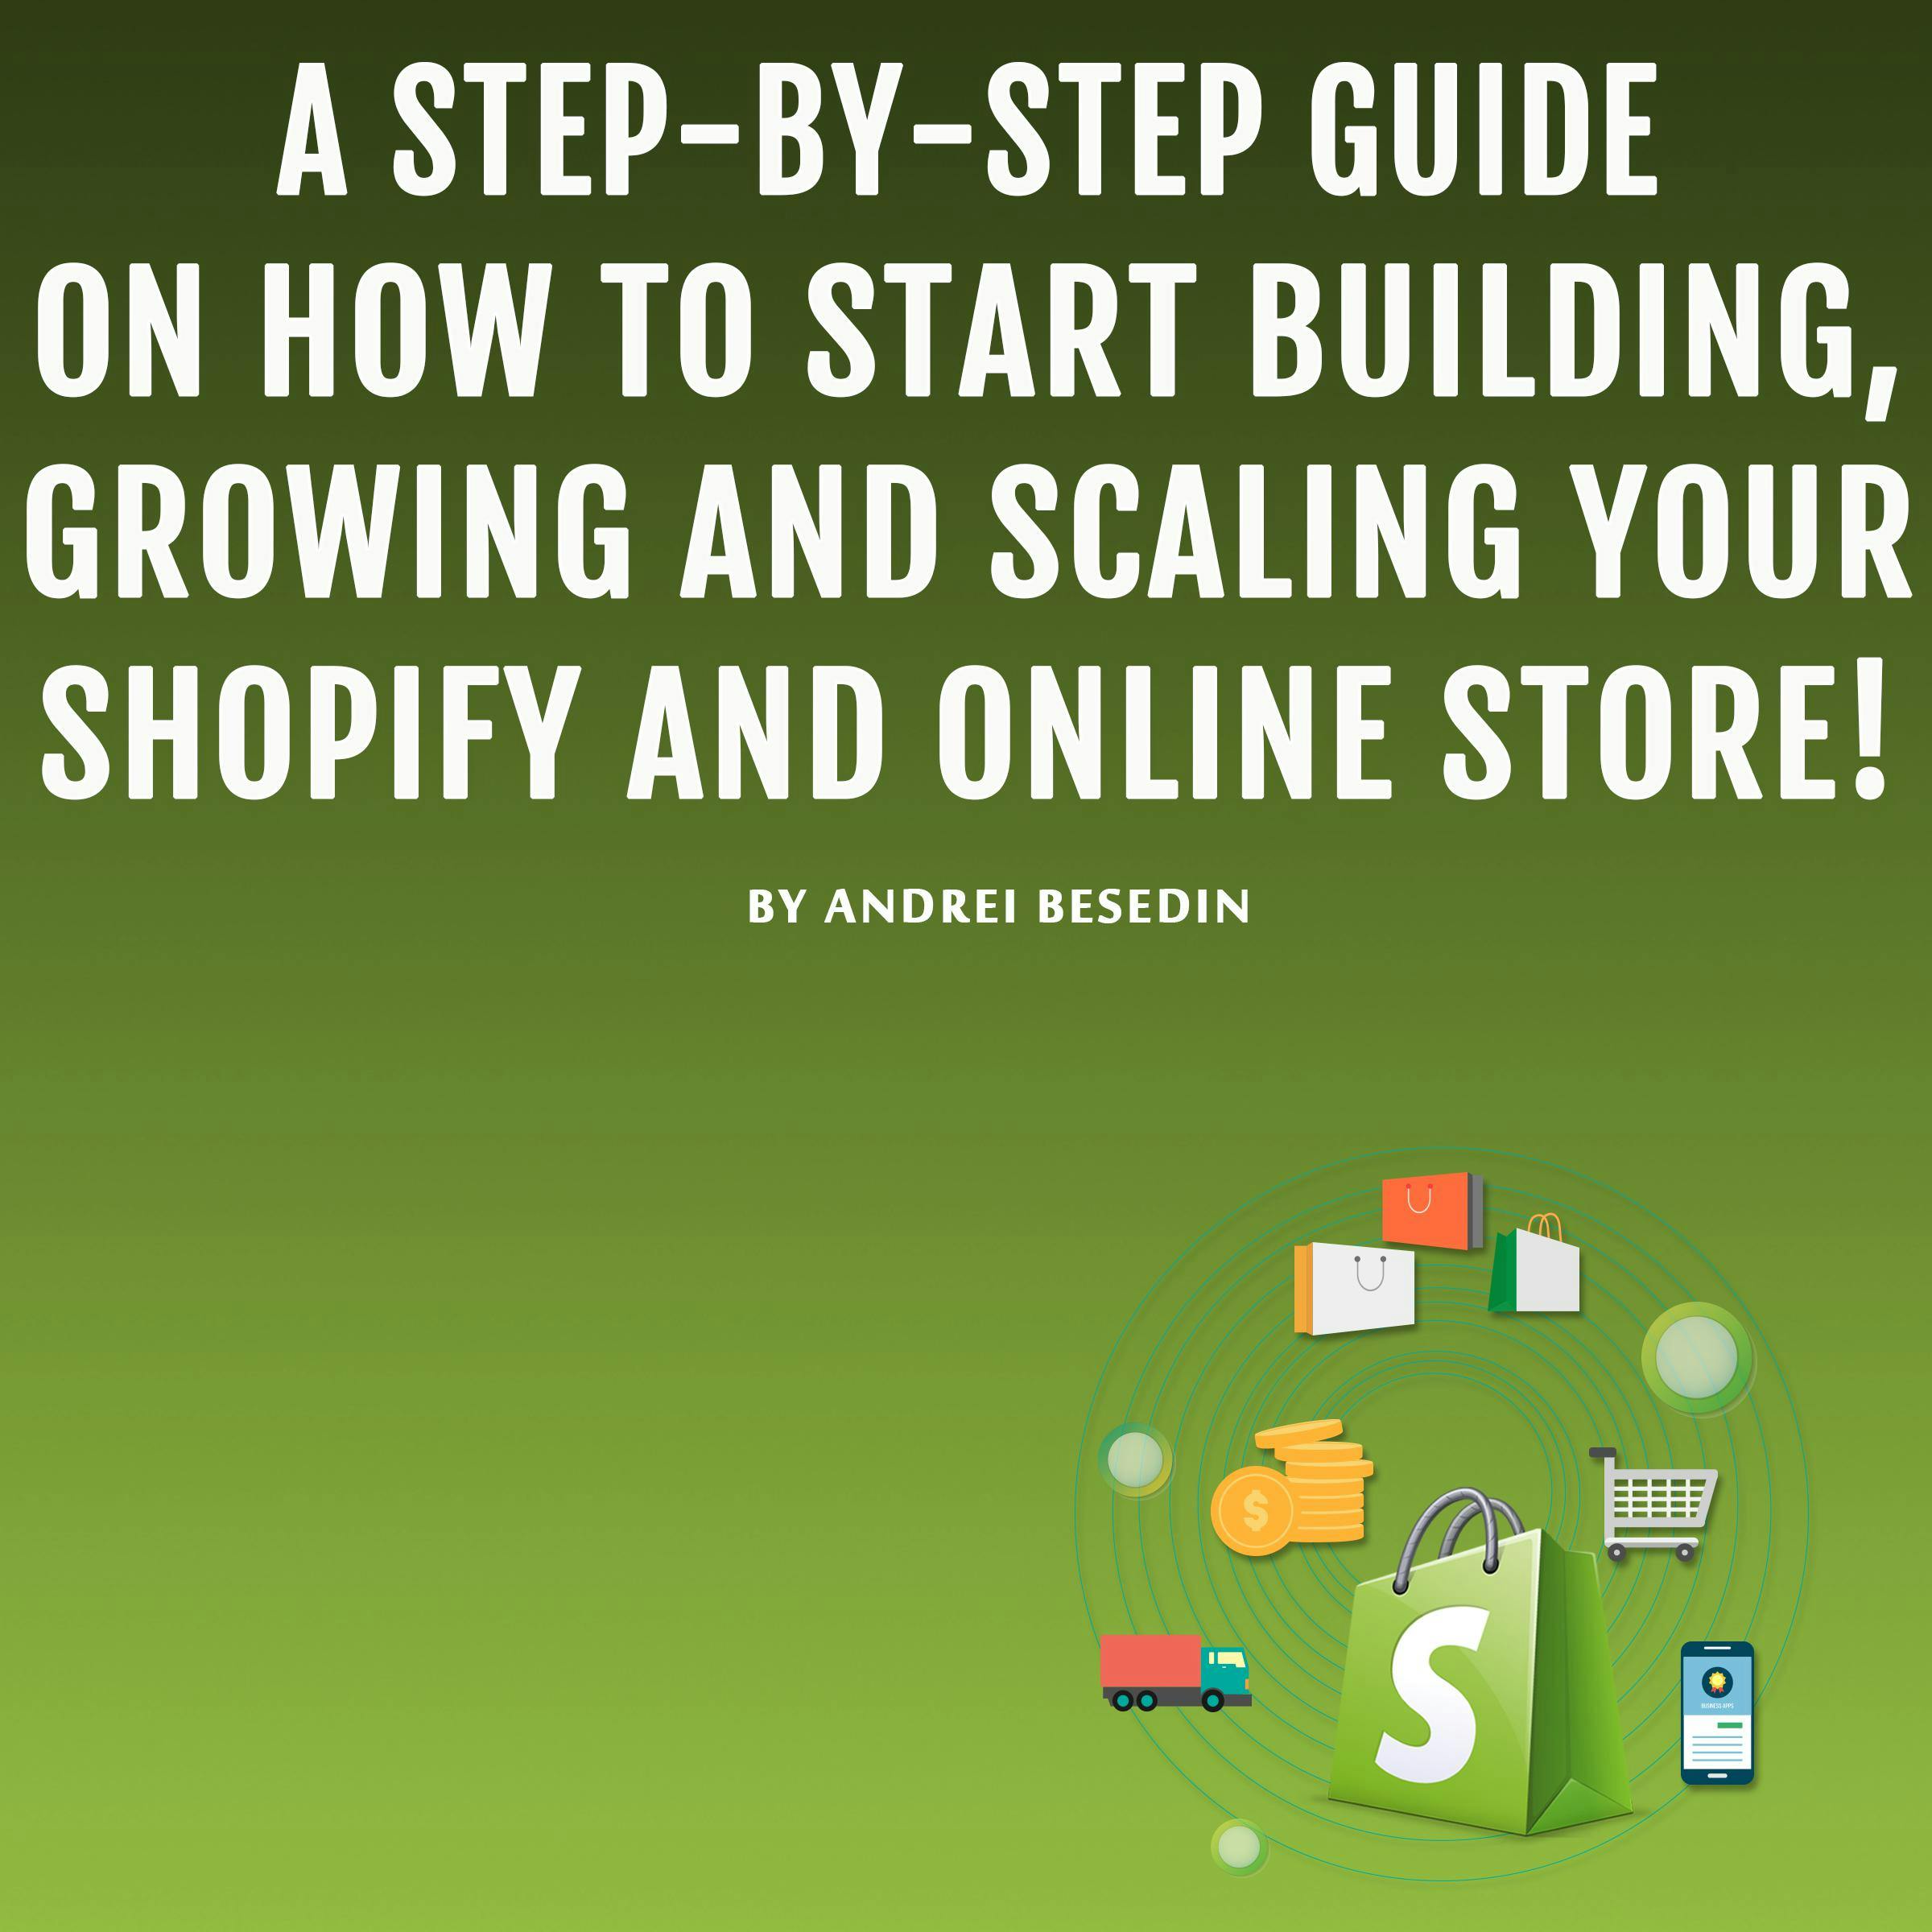 A Step-by-Step Guide on How to Start Building, Growing, and Scaling Your Shopify and Online Store! - Andrei Besedin